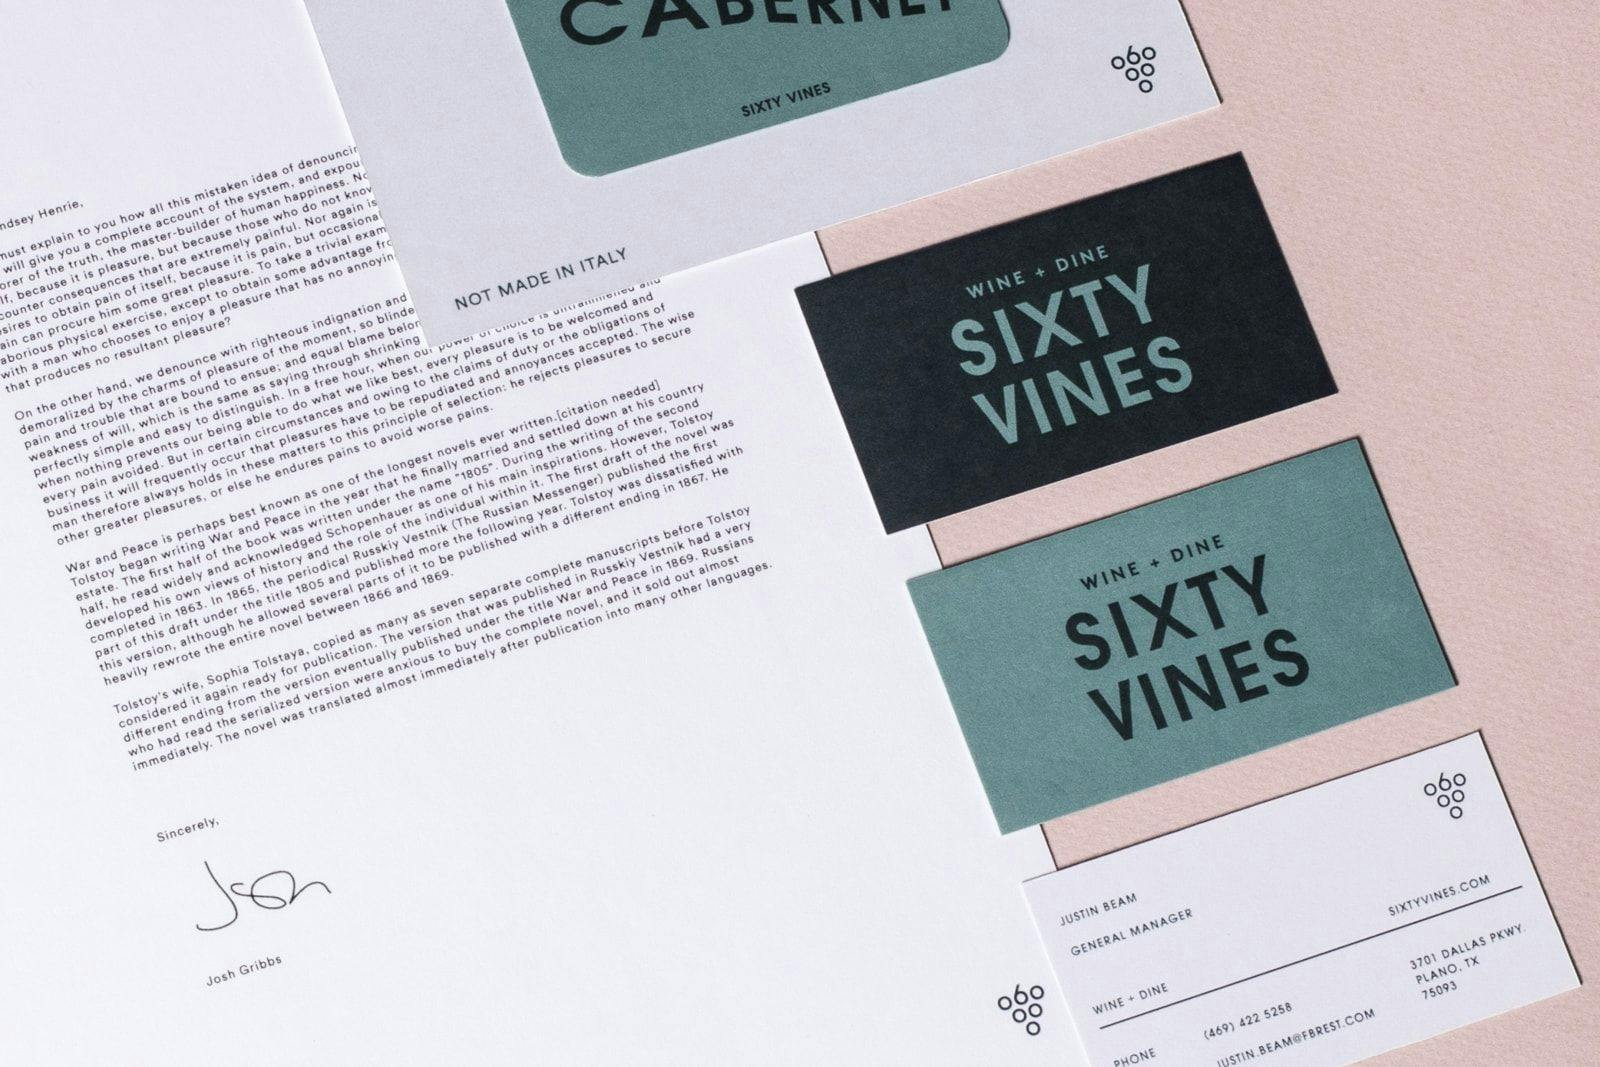 Document and business cards for Sixty Vines